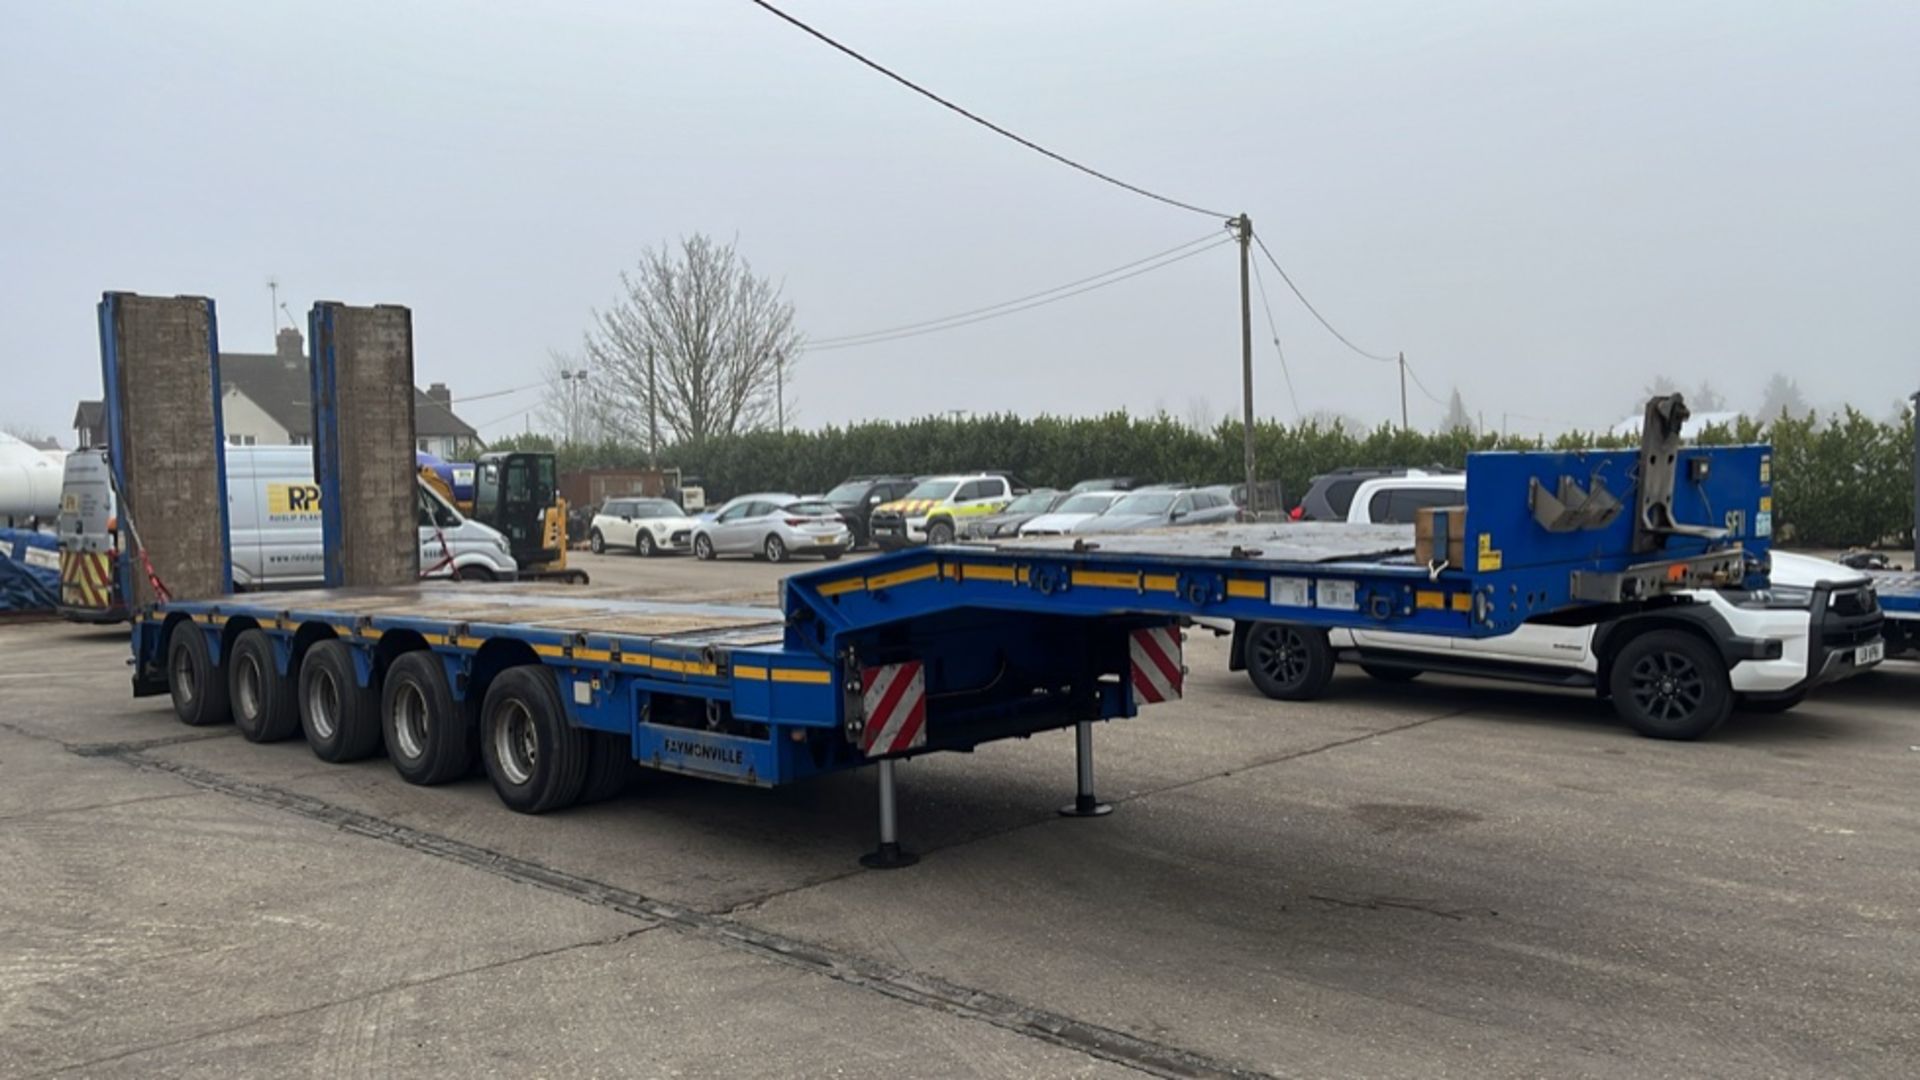 FAYMONVILLE MULTIMAX - EXTENDABLE SEMI LOW LOADER Trailer (Year 2019)